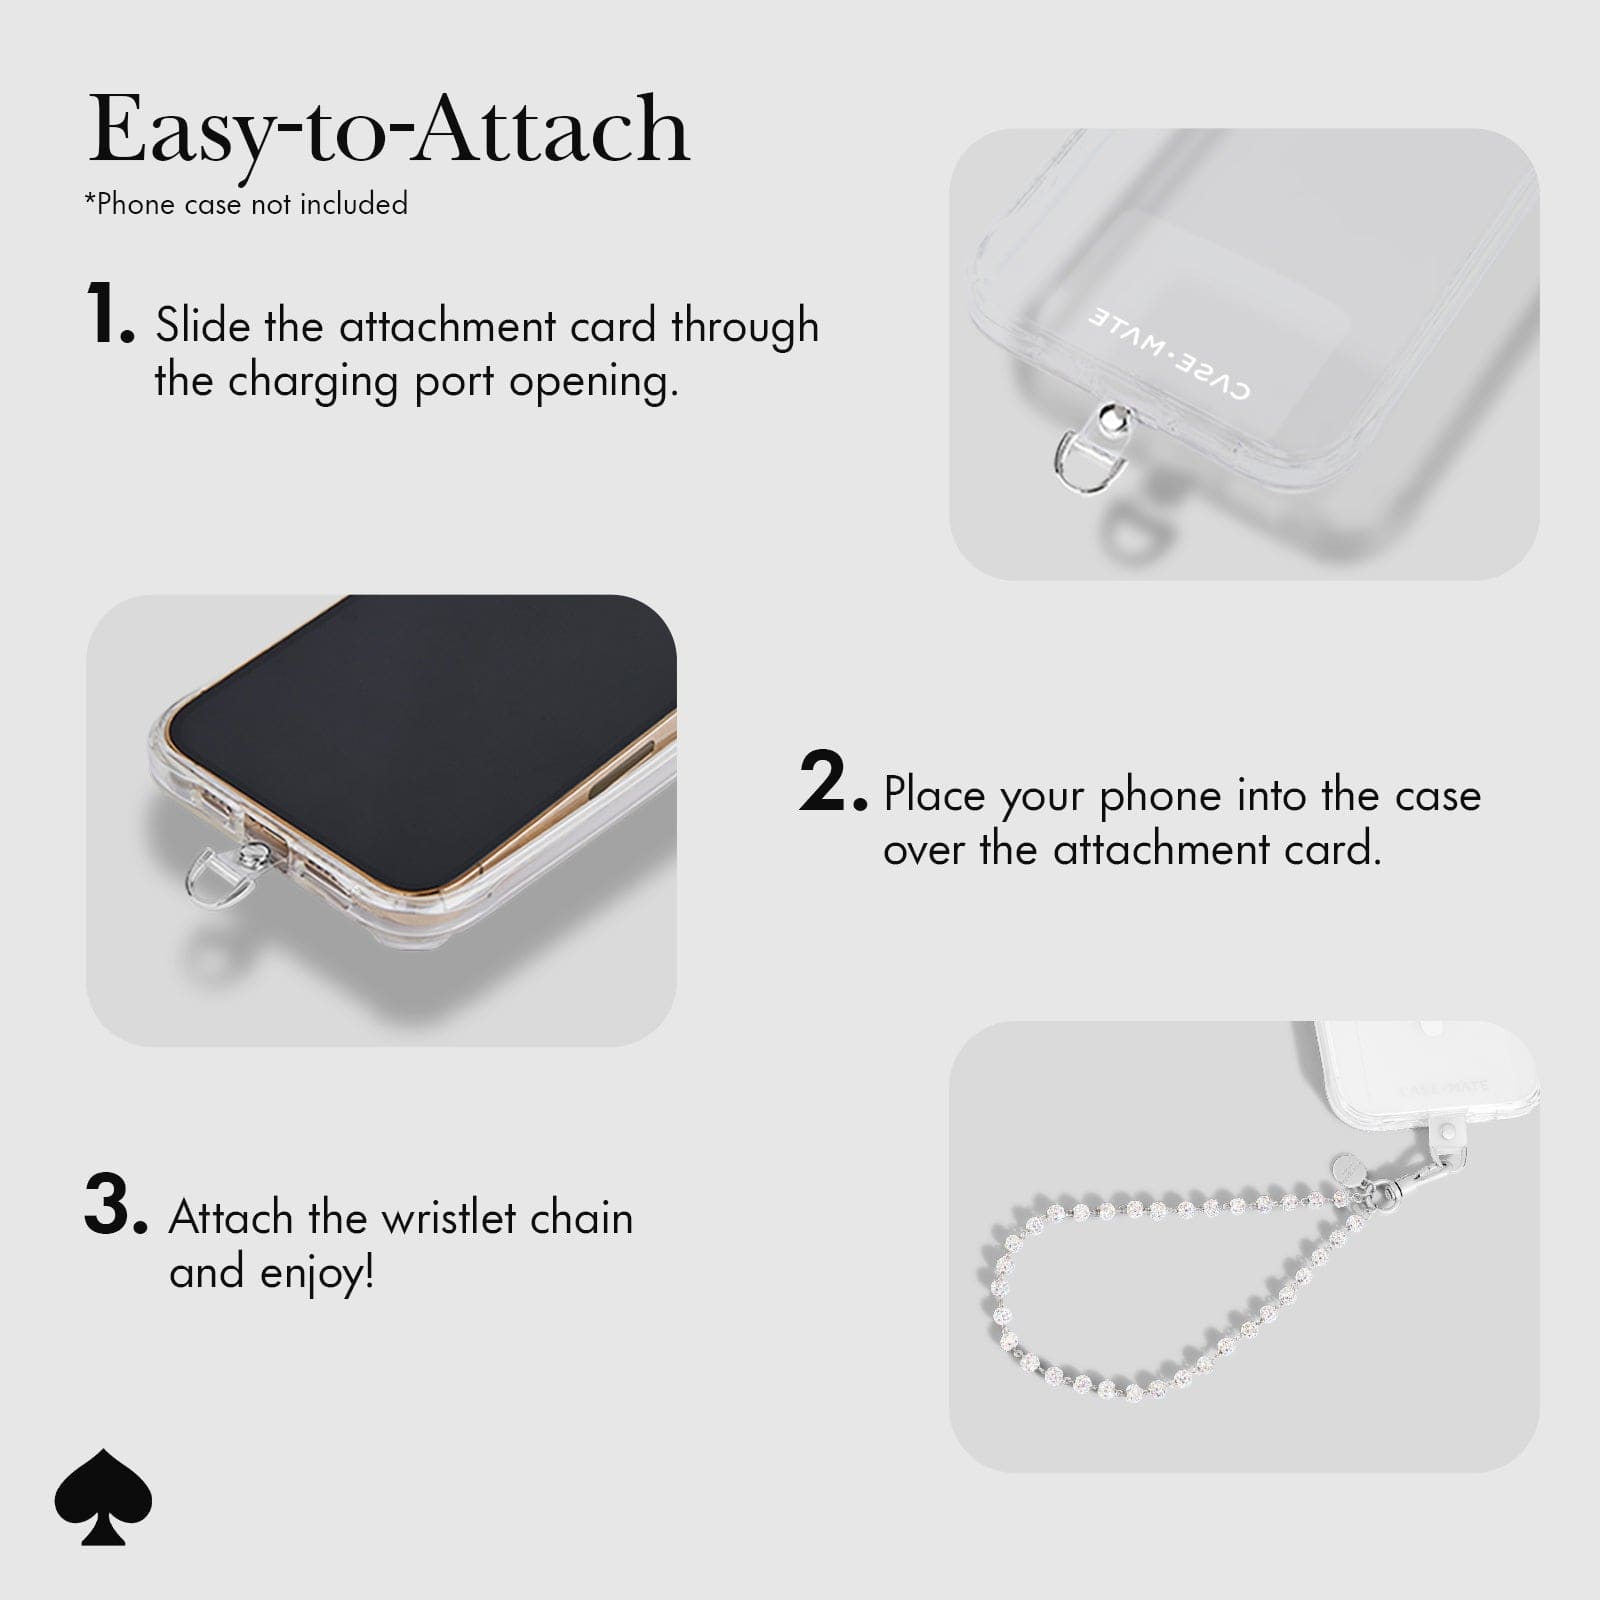 EASY-TO-ATTACH. PHONE CASE NOT INCLUDED. 1. SLIDE THE ATTACHMENT CARD THROUGH THE CHARGING PORT OPENING. 2. PLACE YOUR PHONE INTO THE CASE OVER THE ATTACHMENT CARD. 3. ATTACH THE WRISTLET CHAIN AND ENJOY!